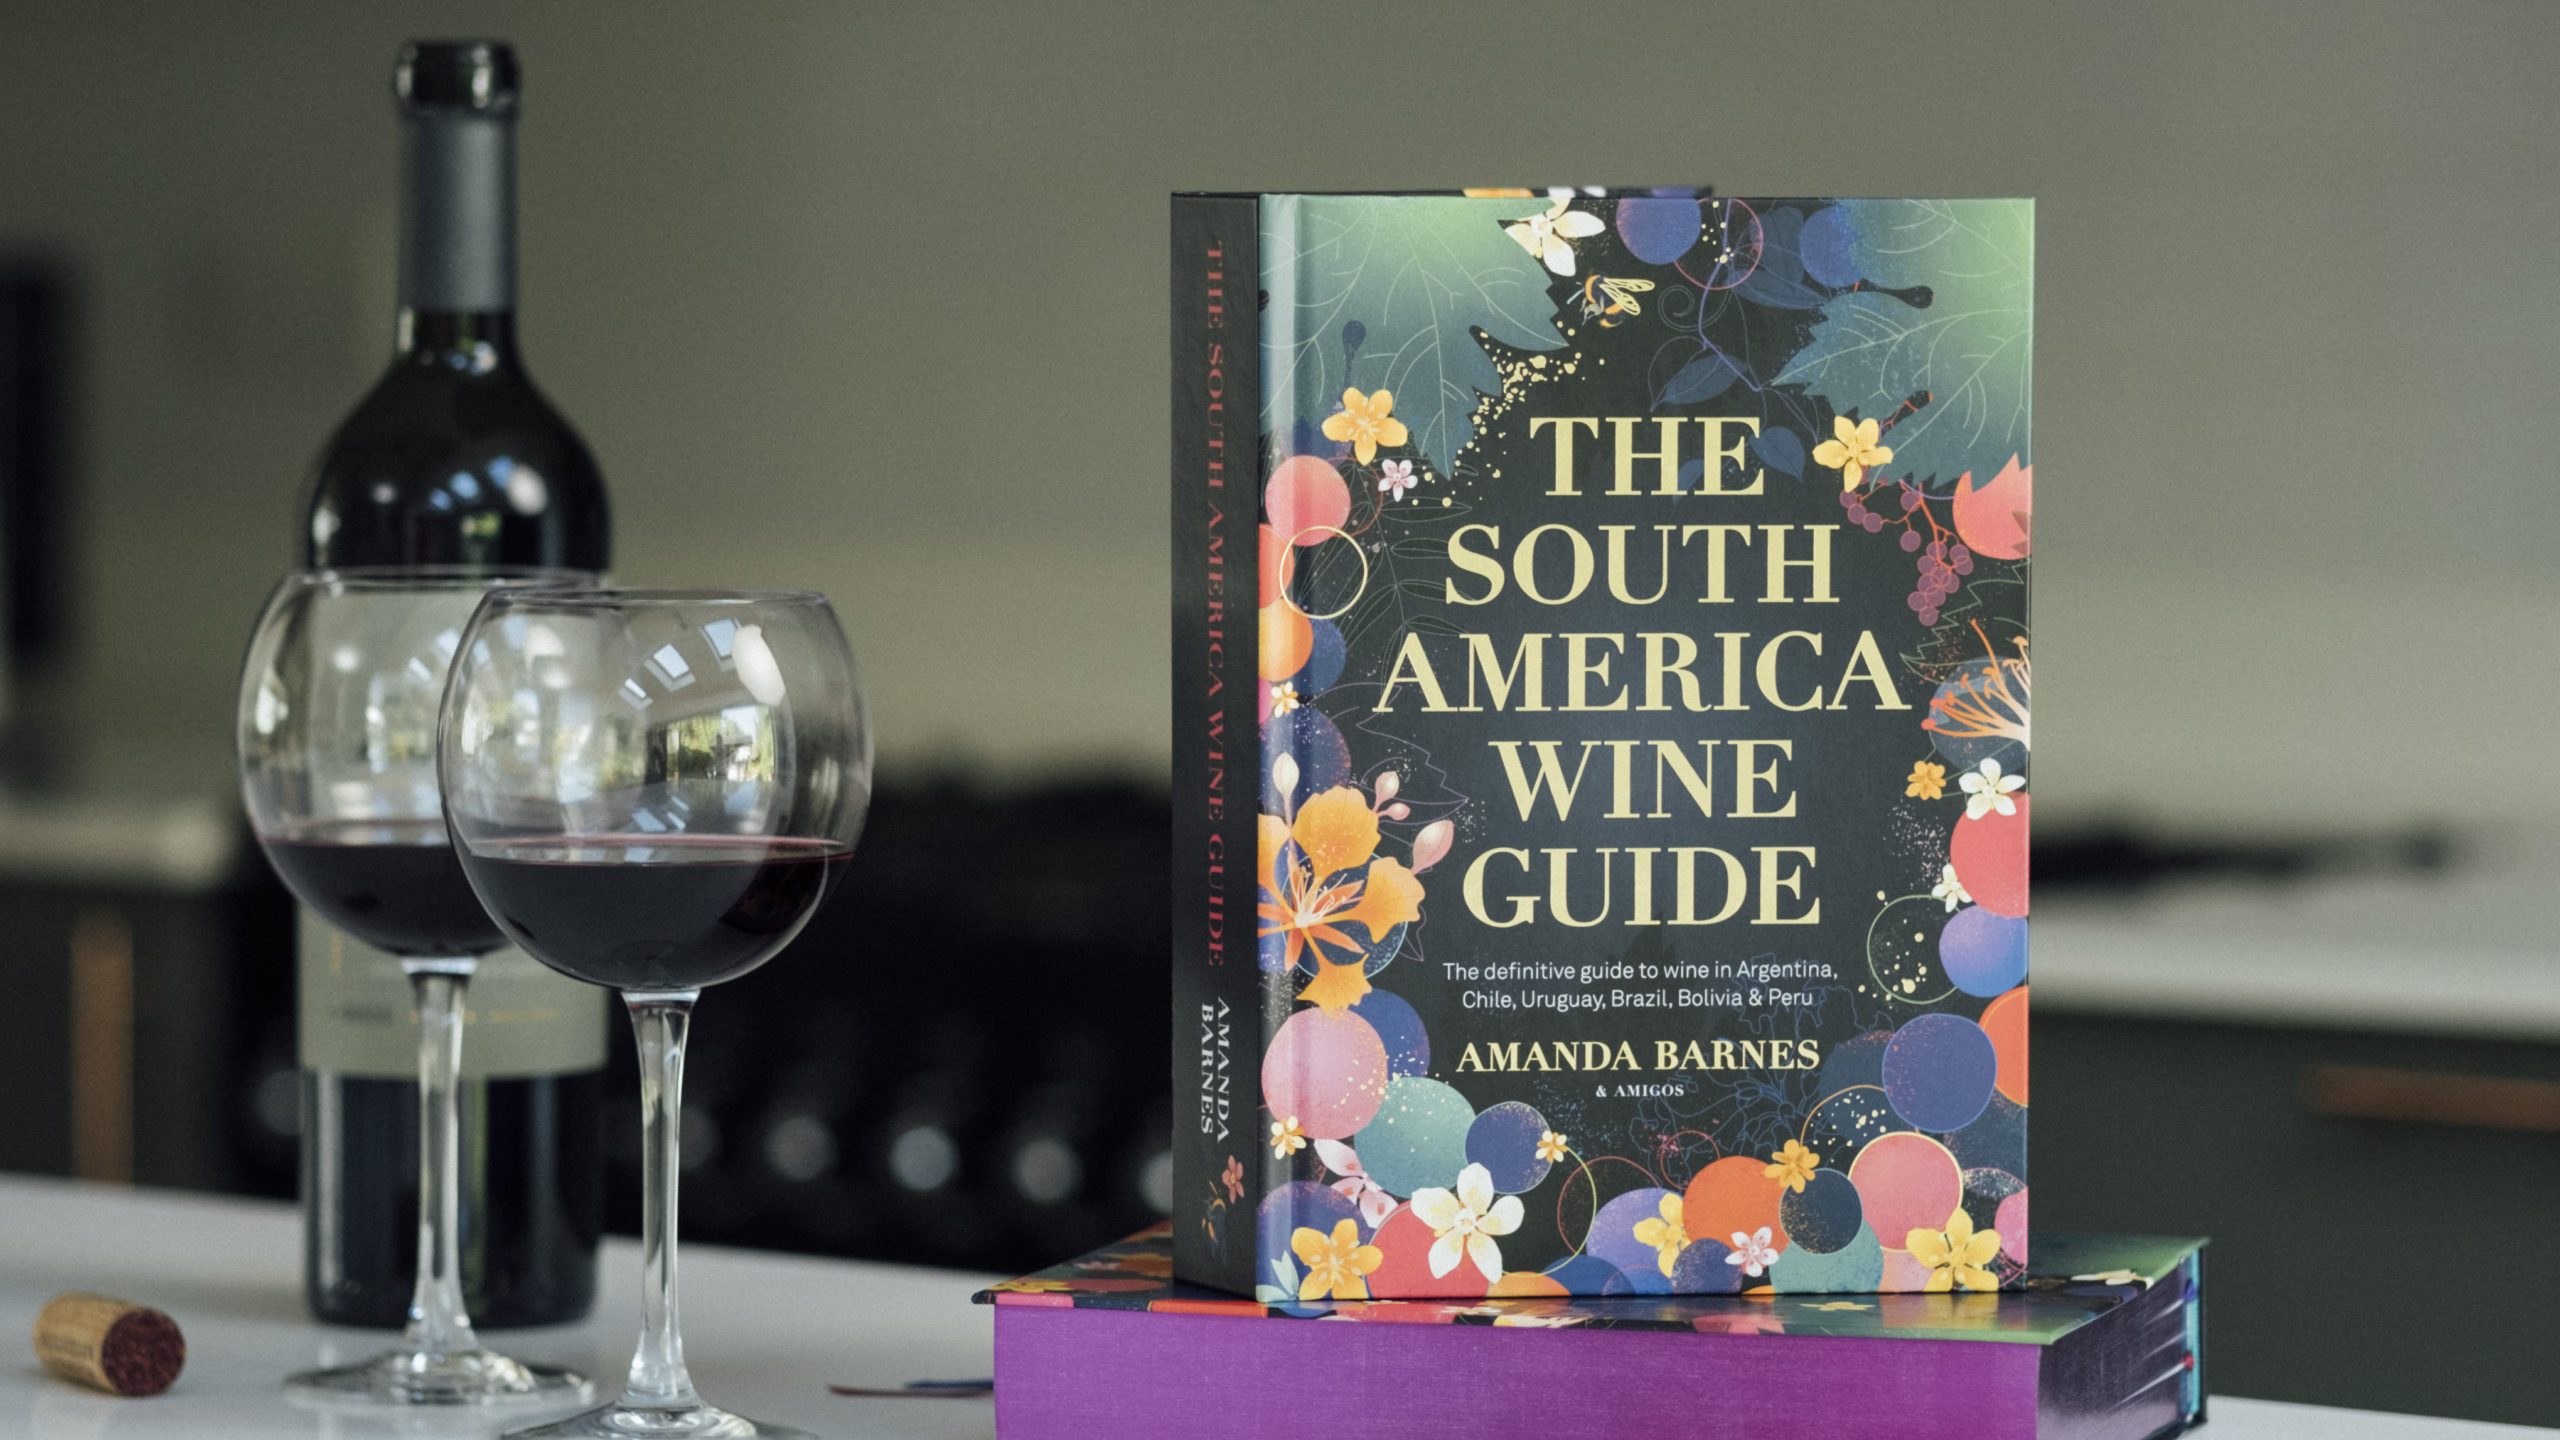 South-America-Wine-Guide-book-cropped-scaled